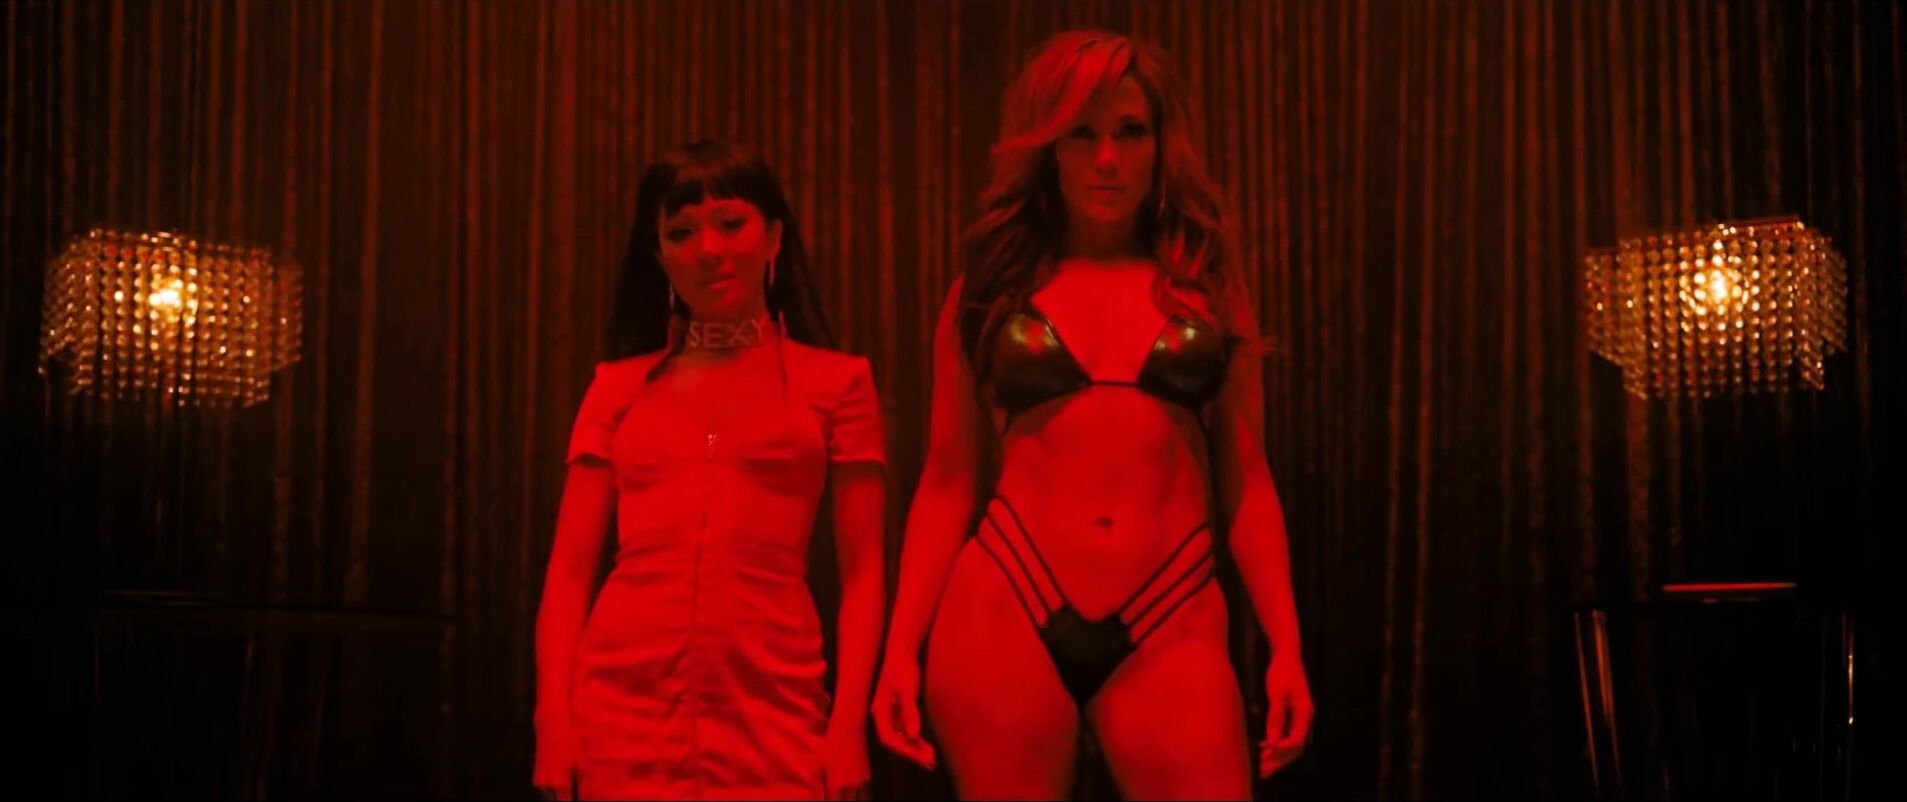 New Hot Latina and Eastern strippers Jennifer Lopez and Constance Wu nude in Hustlers (2019) Casal - 1